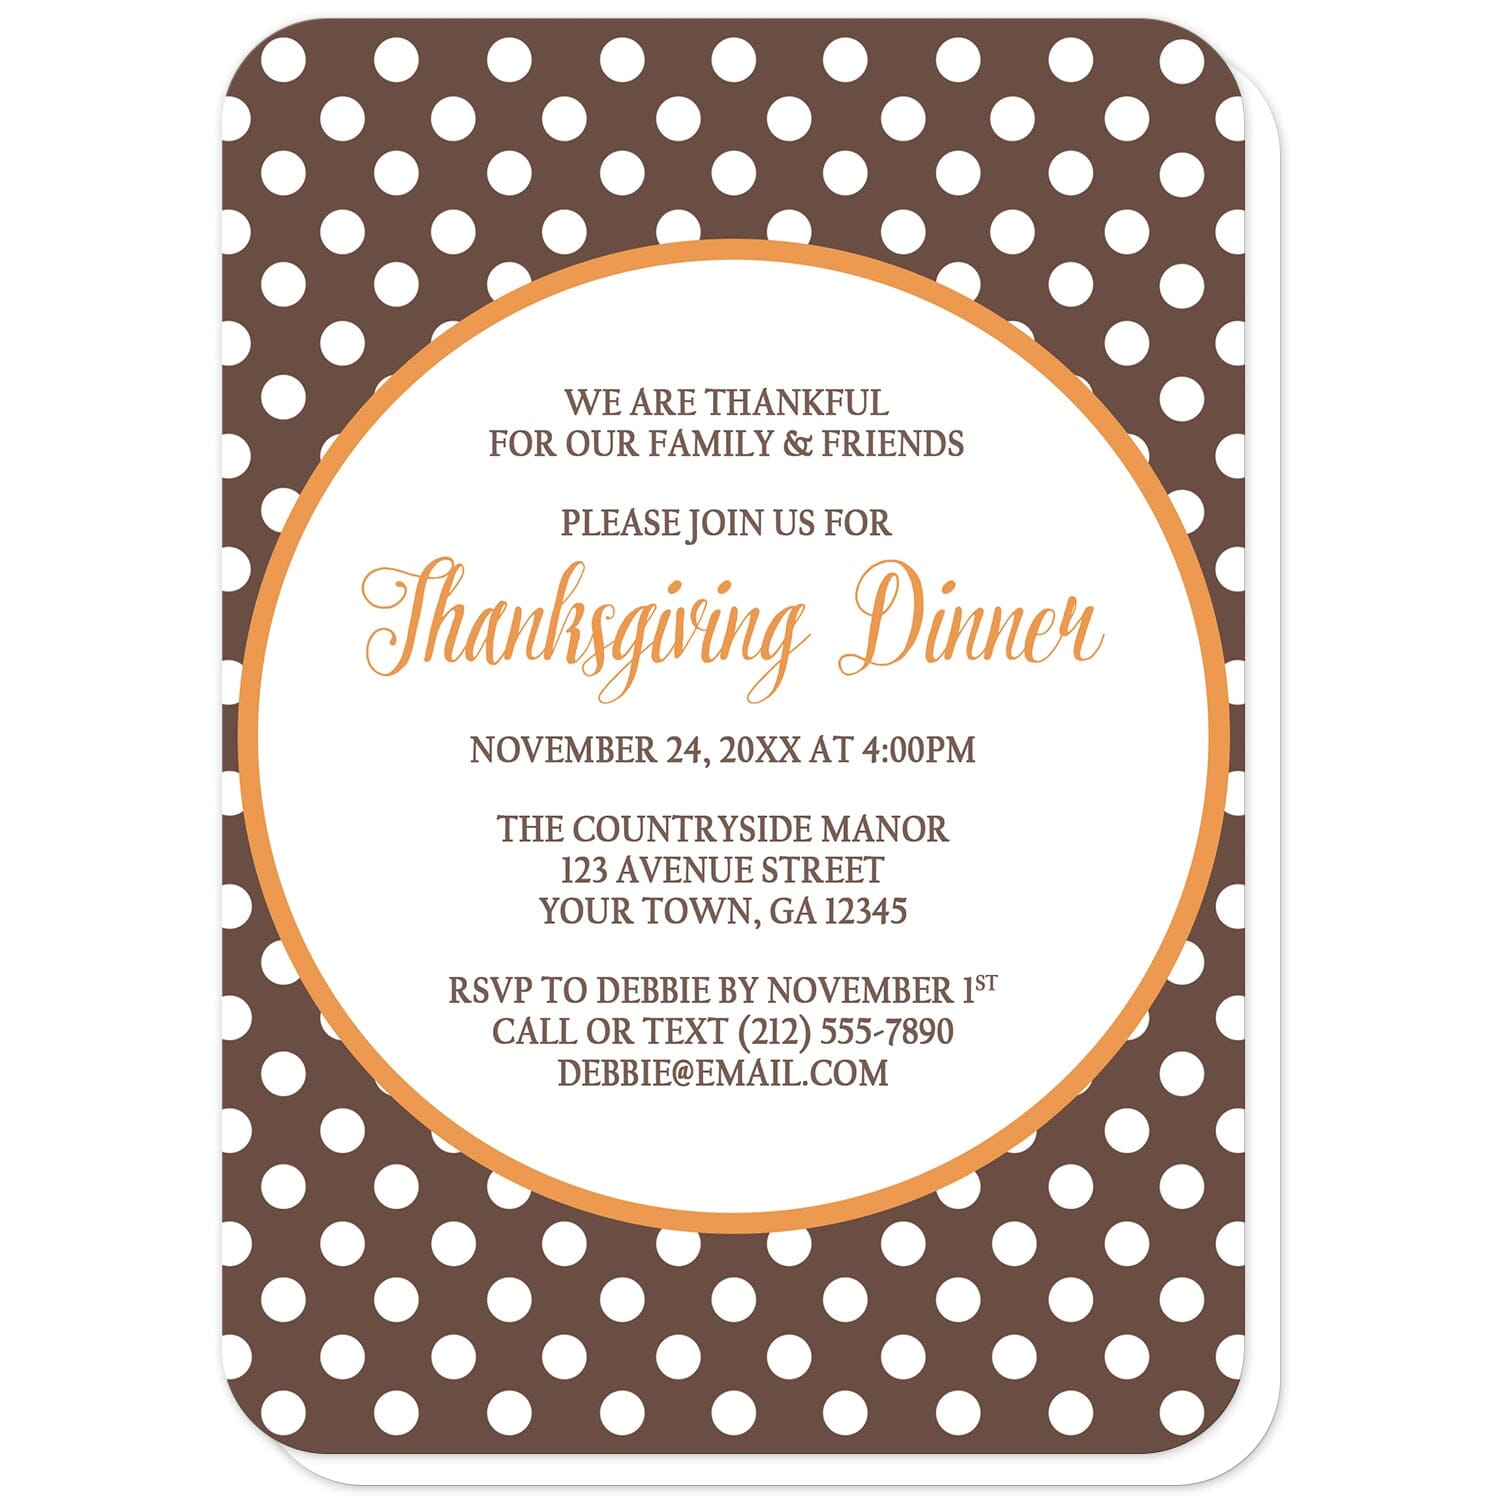 Orange Brown Polka Dot Thanksgiving Invitations (with rounded corners) at Artistically Invited. Autumn-inspired orange brown polka dot Thanksgiving invitations with your holiday celebration details custom printed in orange and brown inside a white circle outlined in orange, over a brown polka dot pattern. "Thanksgiving Dinner" is printed in orange while the remaining details are printed in brown.